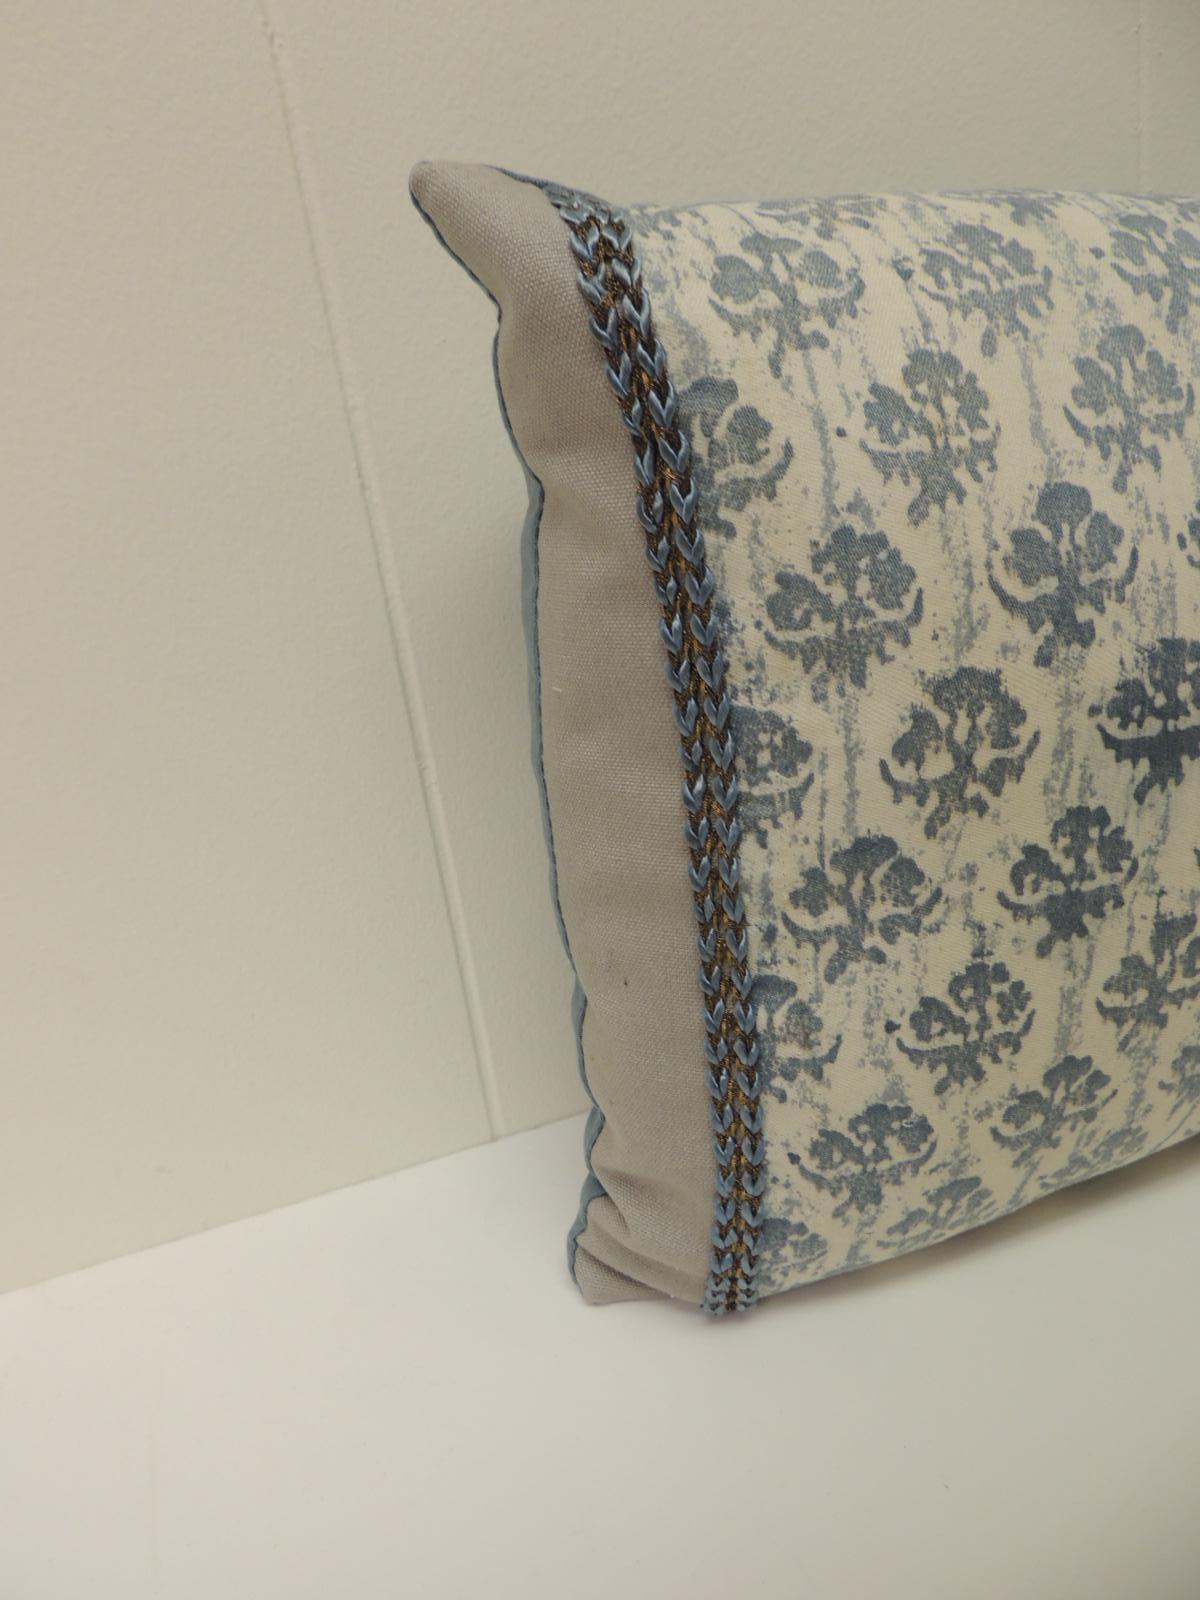 Hand-Crafted Petite 1940s Italian Blue and White Fortuny Lumbar Decorative Pillow